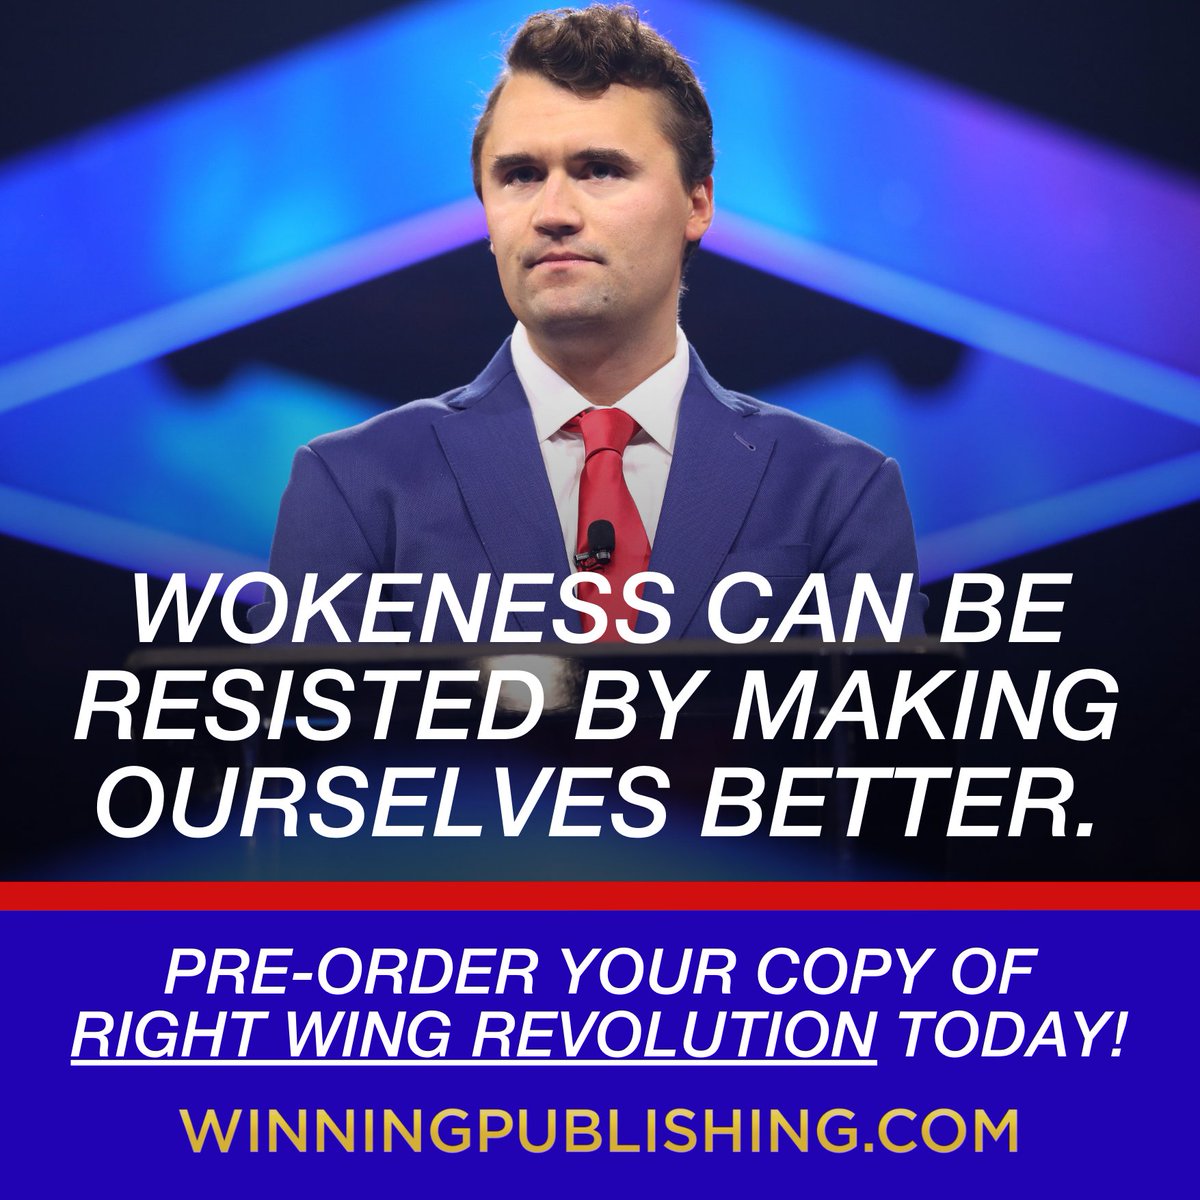 Don't miss your chance to pre-order @charliekirk11's new book today at WINNINGPUBLISHING.com!